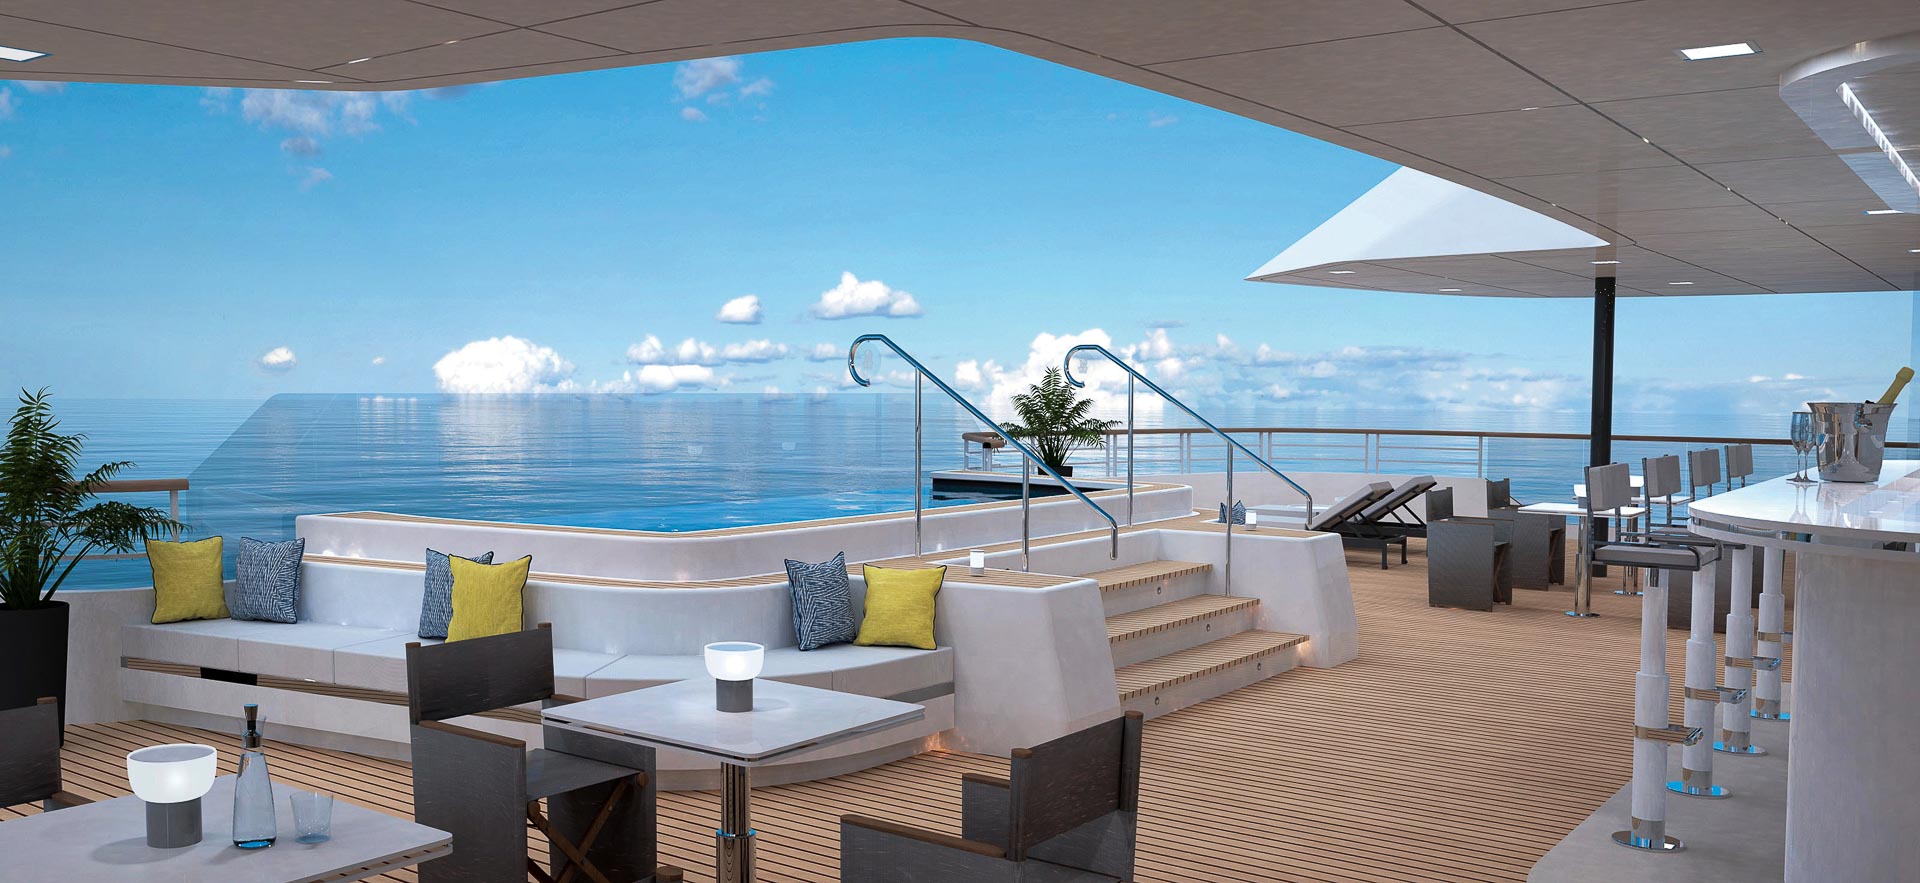 The Ritz-Carlton Yacht Collection - The Outdoor Grill